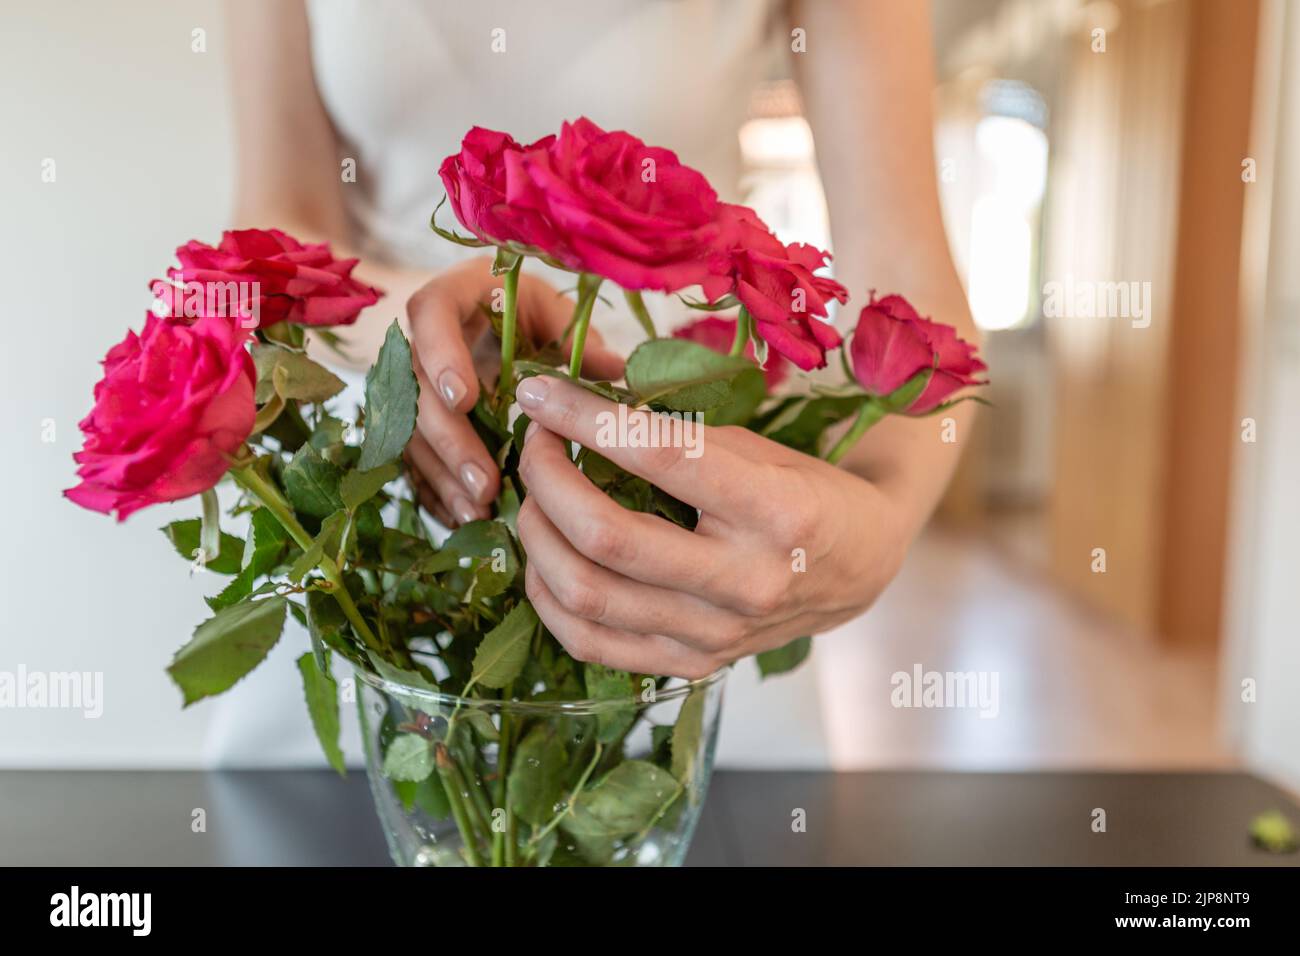 Woman hands taking care of a rose bouquet. Stock Photo